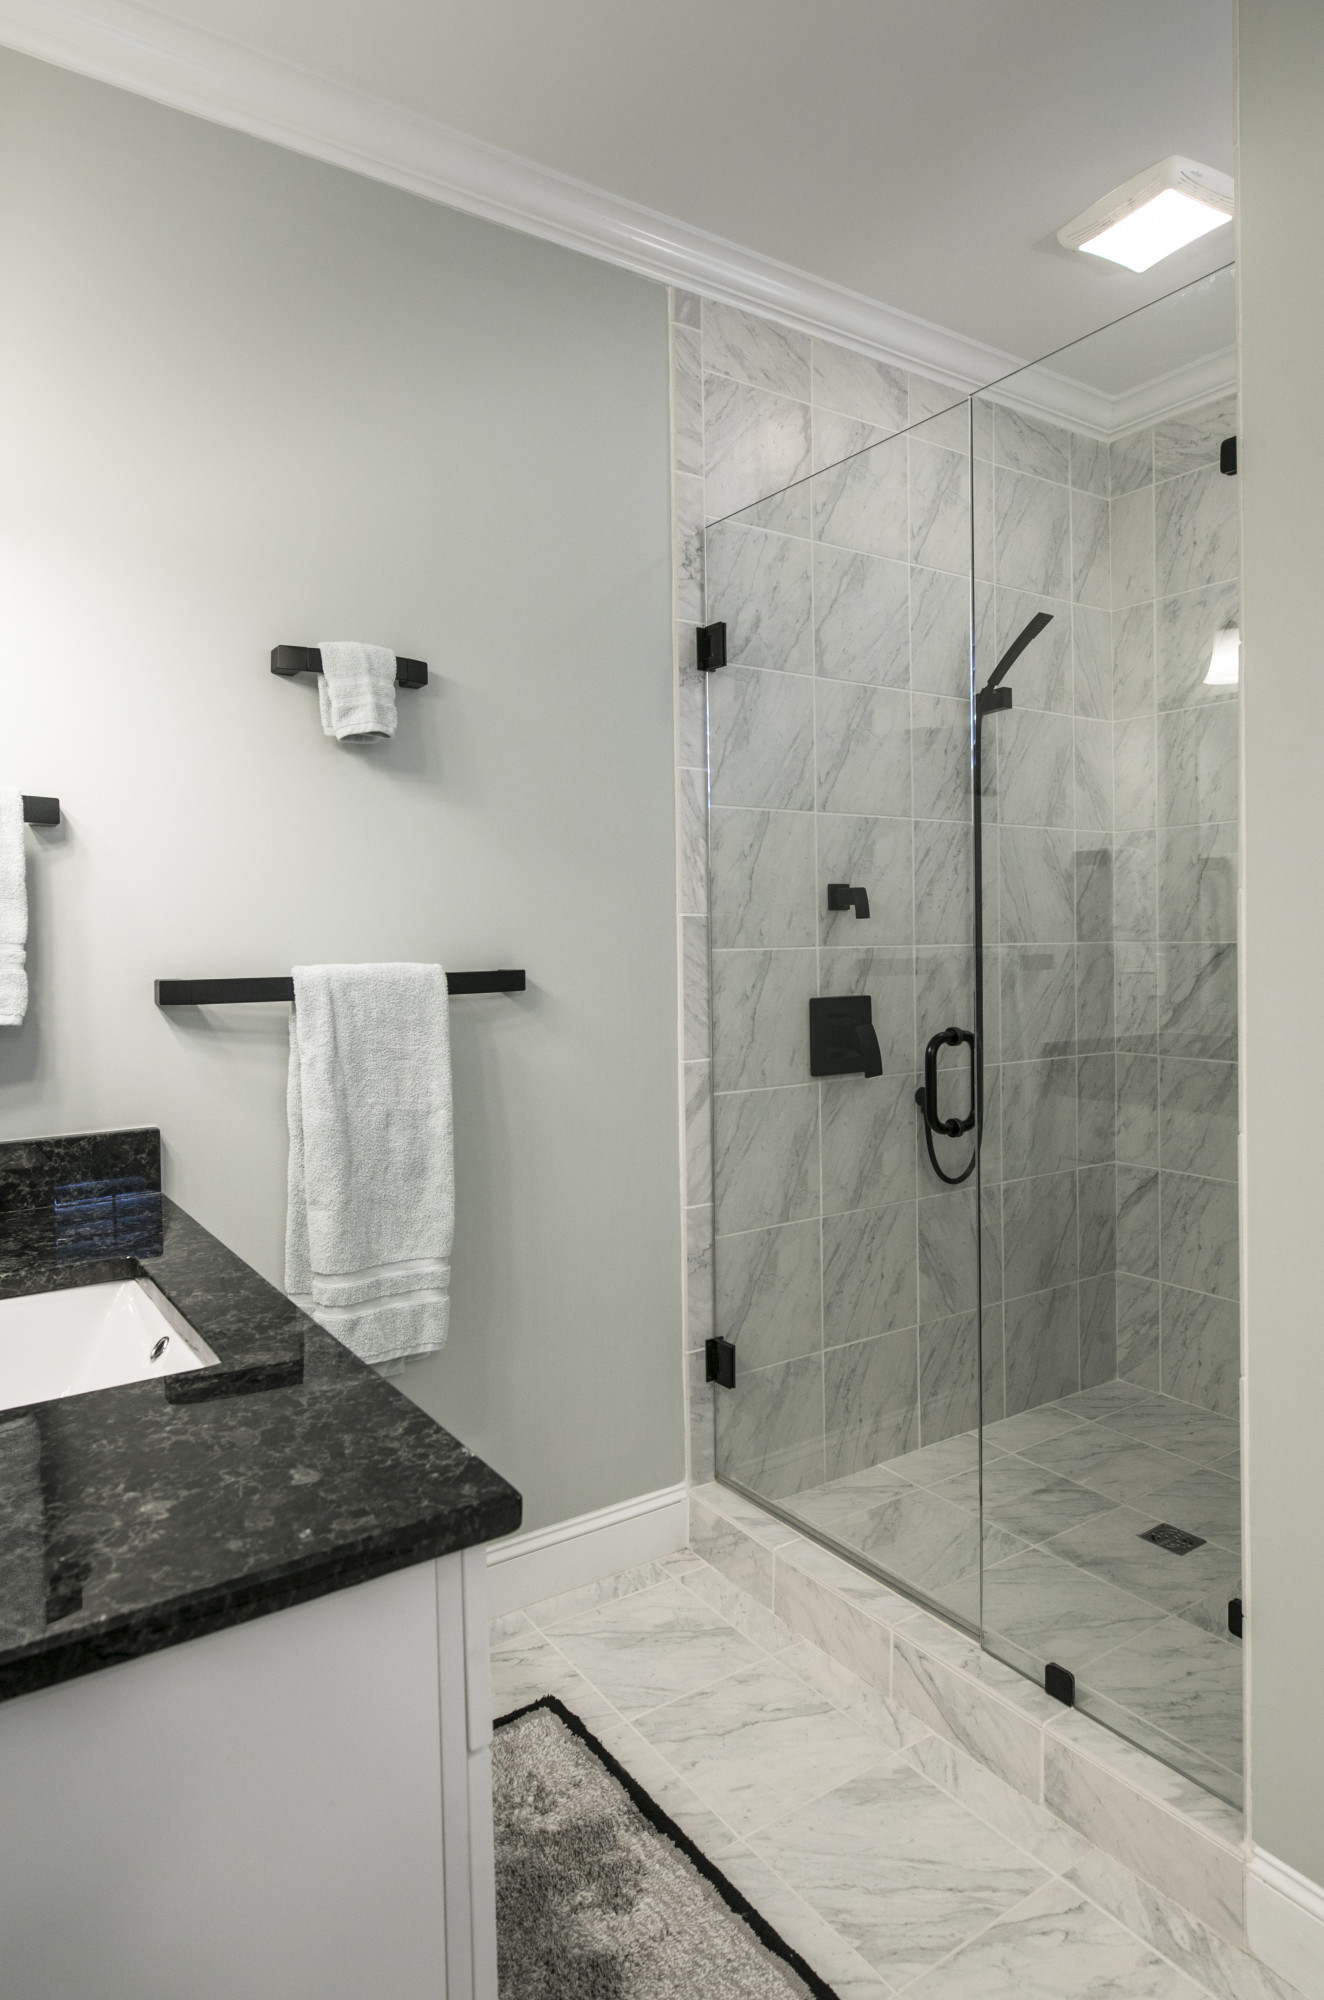 Upgrading your bathroom to a walk in shower room for ease of use for disabled or elderly people